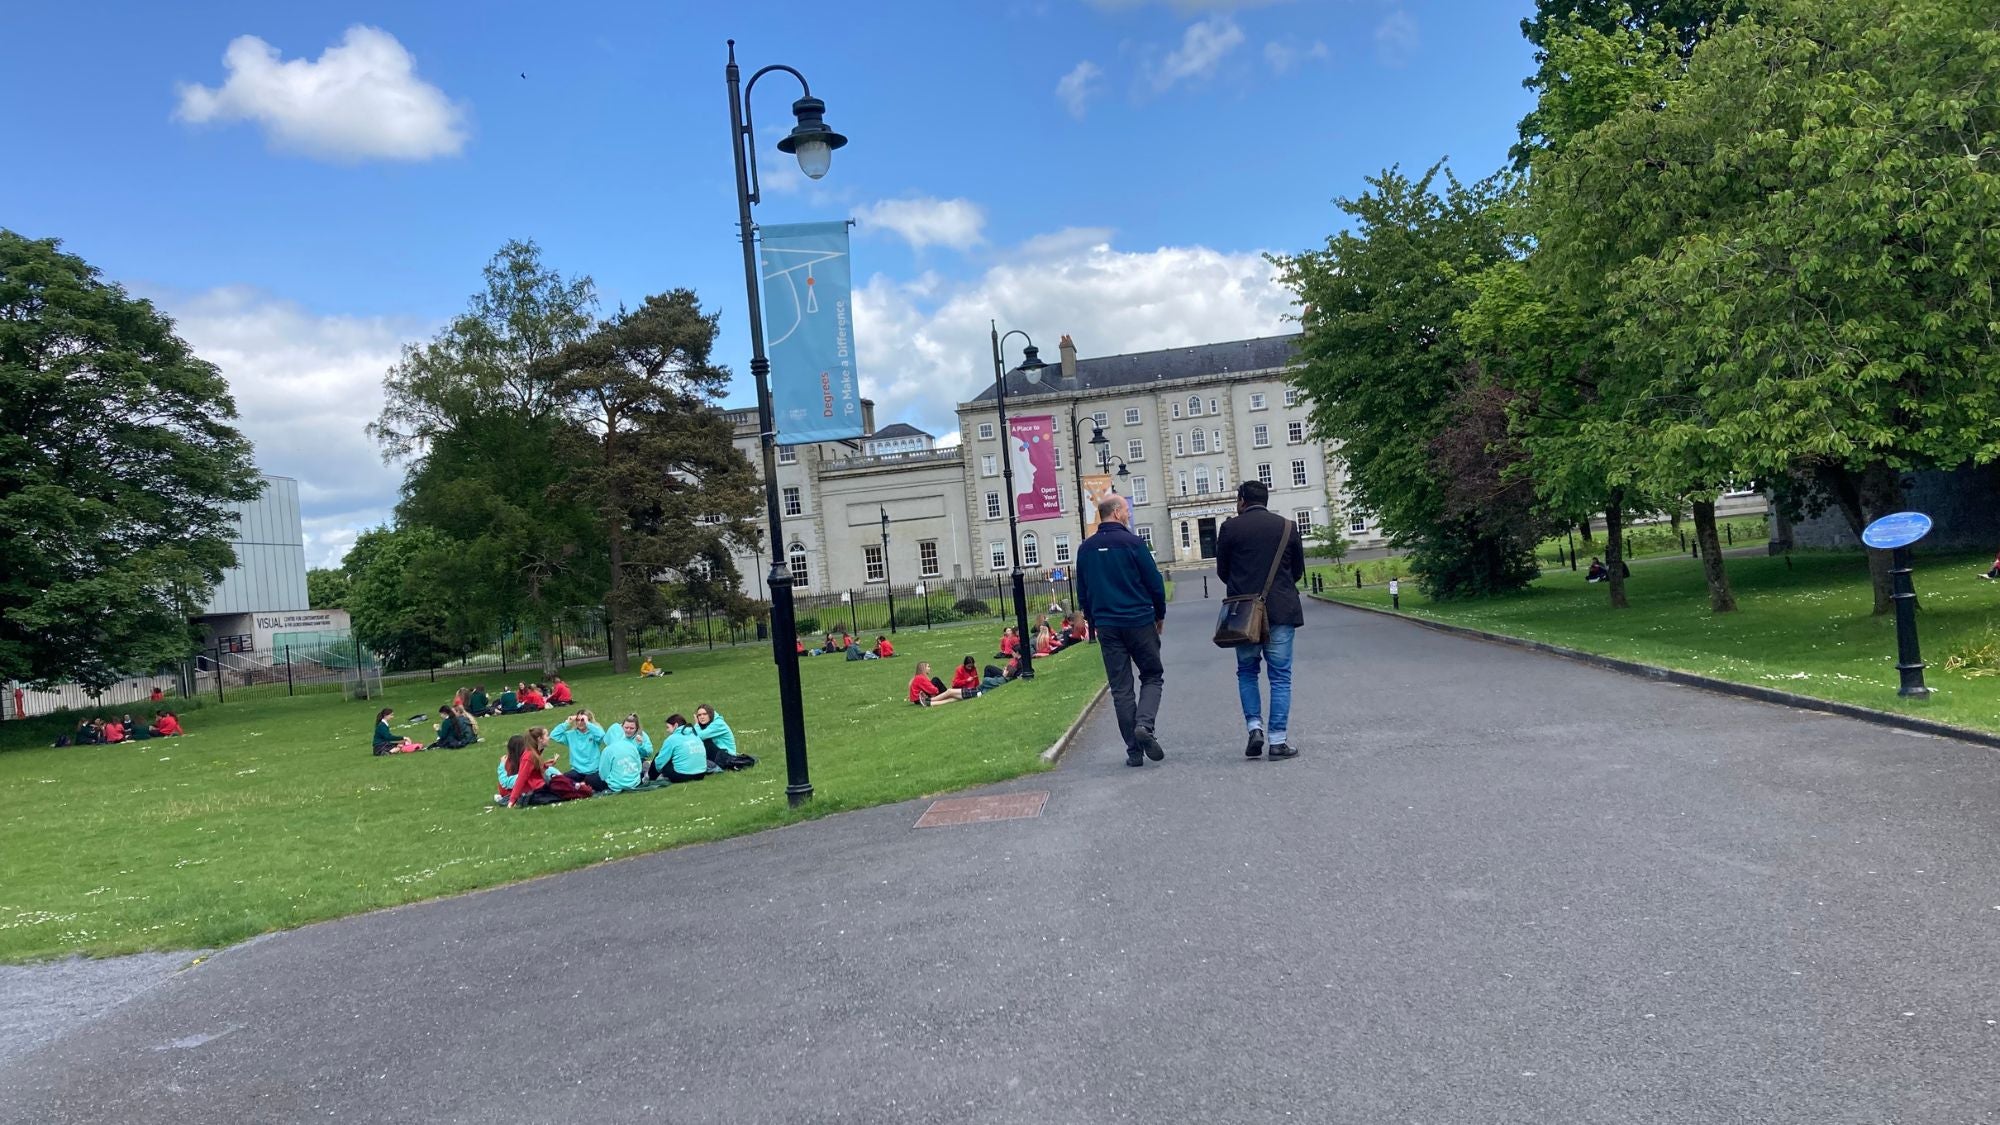 Dr-Immanuel-Darkwa-walking-towards-carlow-college-with-students-sitting-with-friends--on-the-grass